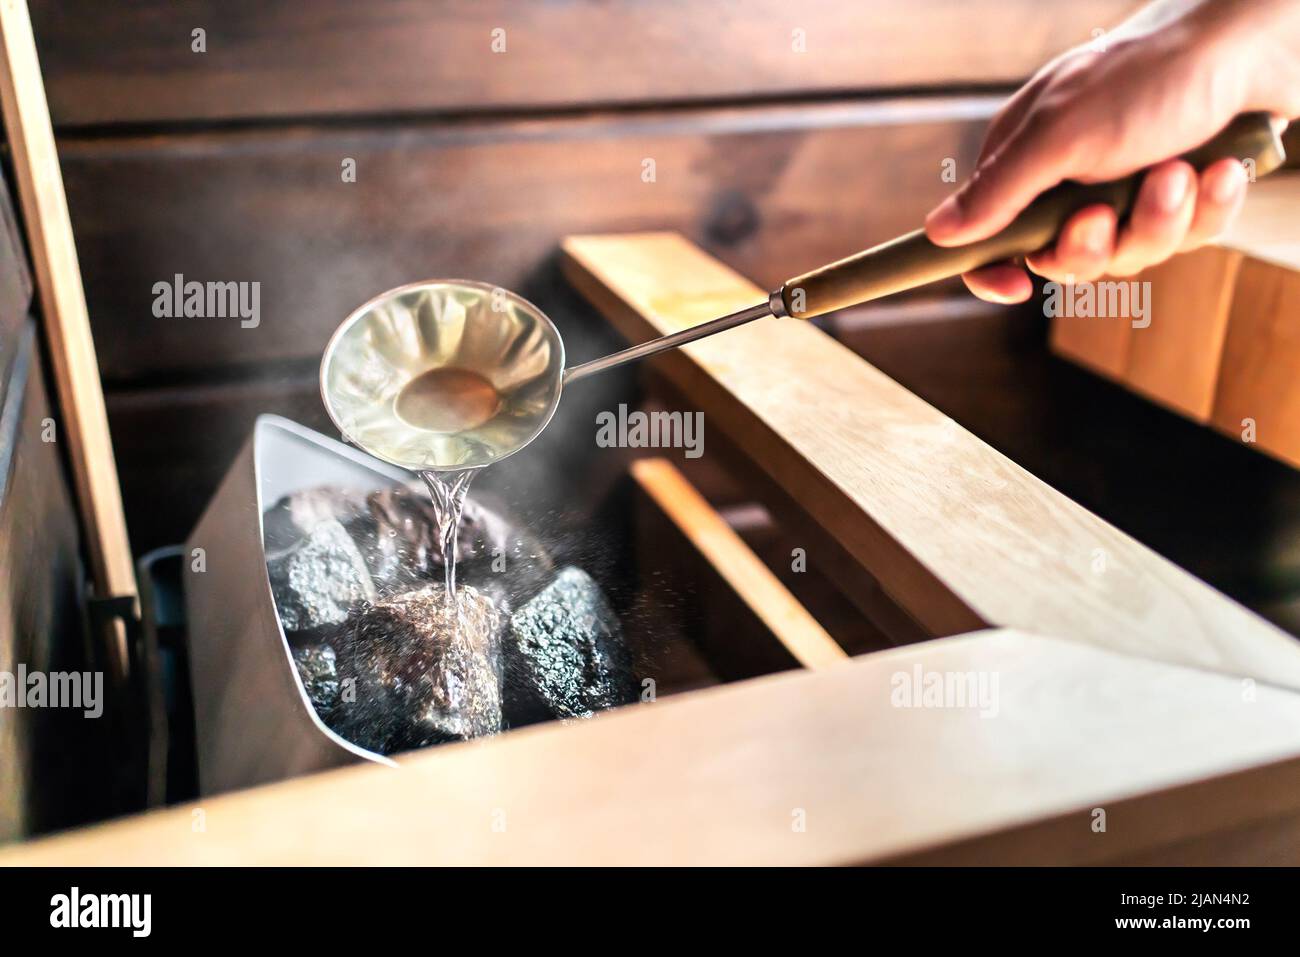 Sauna in Finnish spa. Hot steam, water on stones. Man in wellness and health room in Finland. Warm temperature bath therapy. Traditional summer cabin. Stock Photo